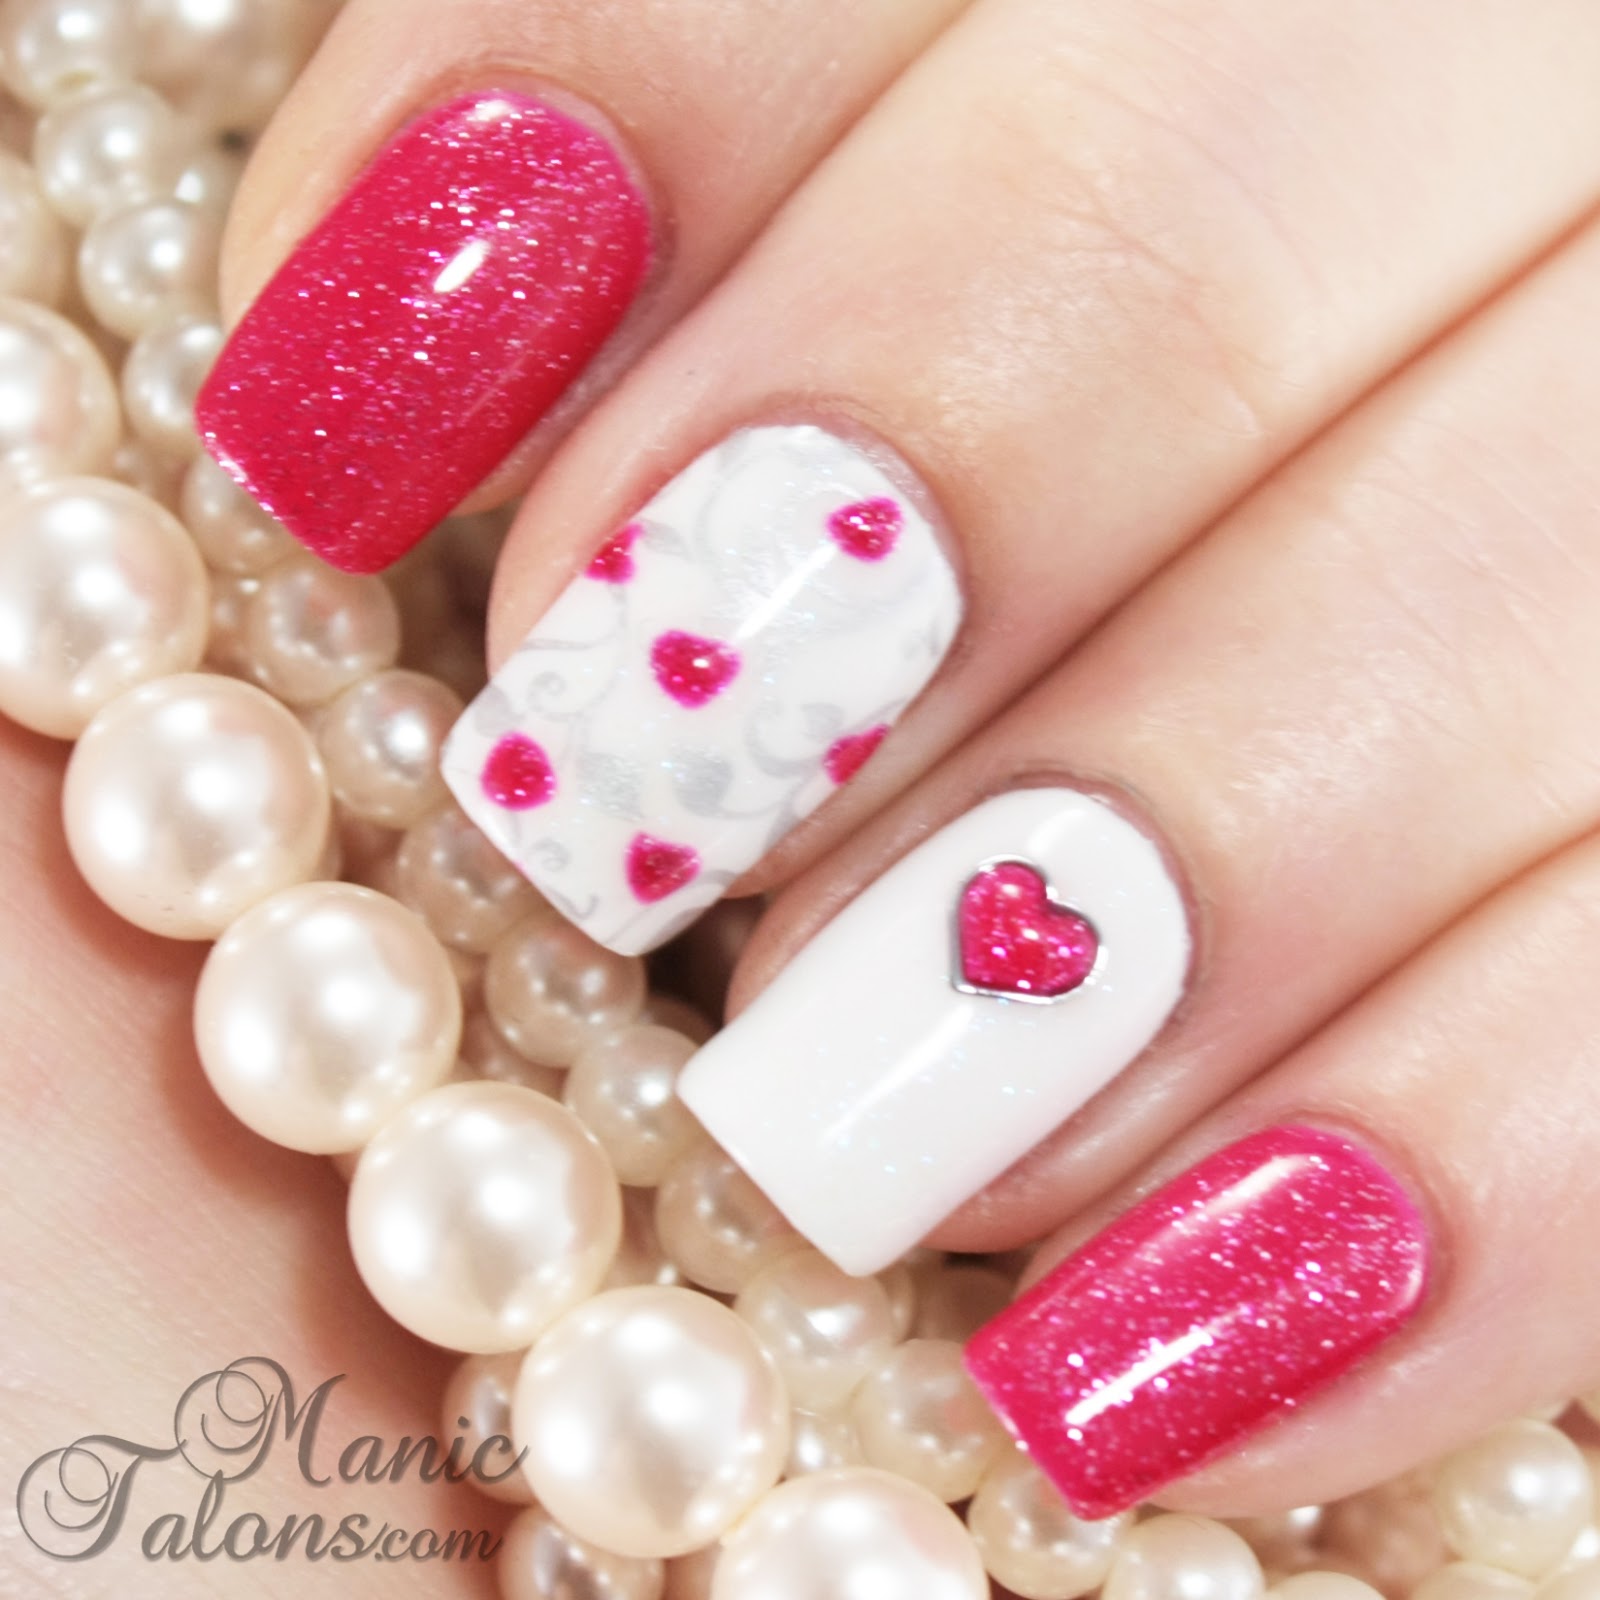 Manic Talons Nail Design Valentine's Day nails with Red Carpet Manicure